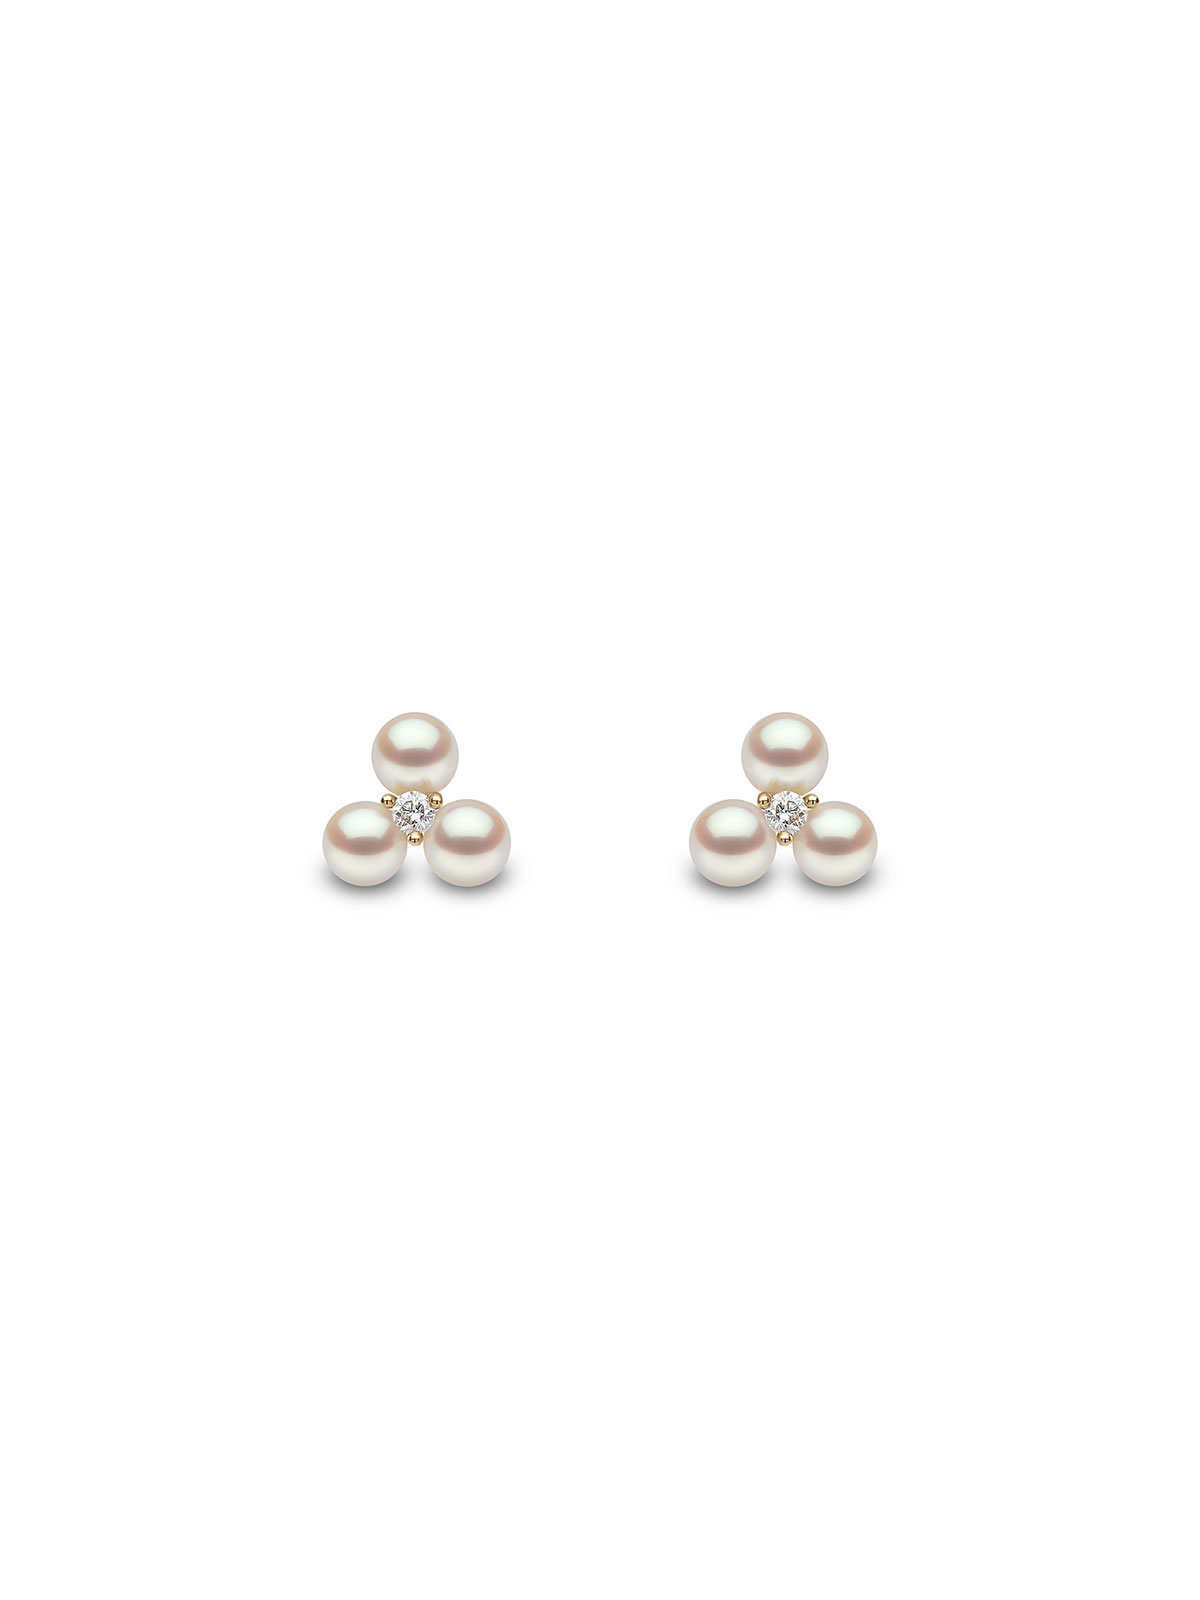 FRESHWATER PEARL AND DIAMOND STUD EARRINGS IN 18CT YELLOW GOLD